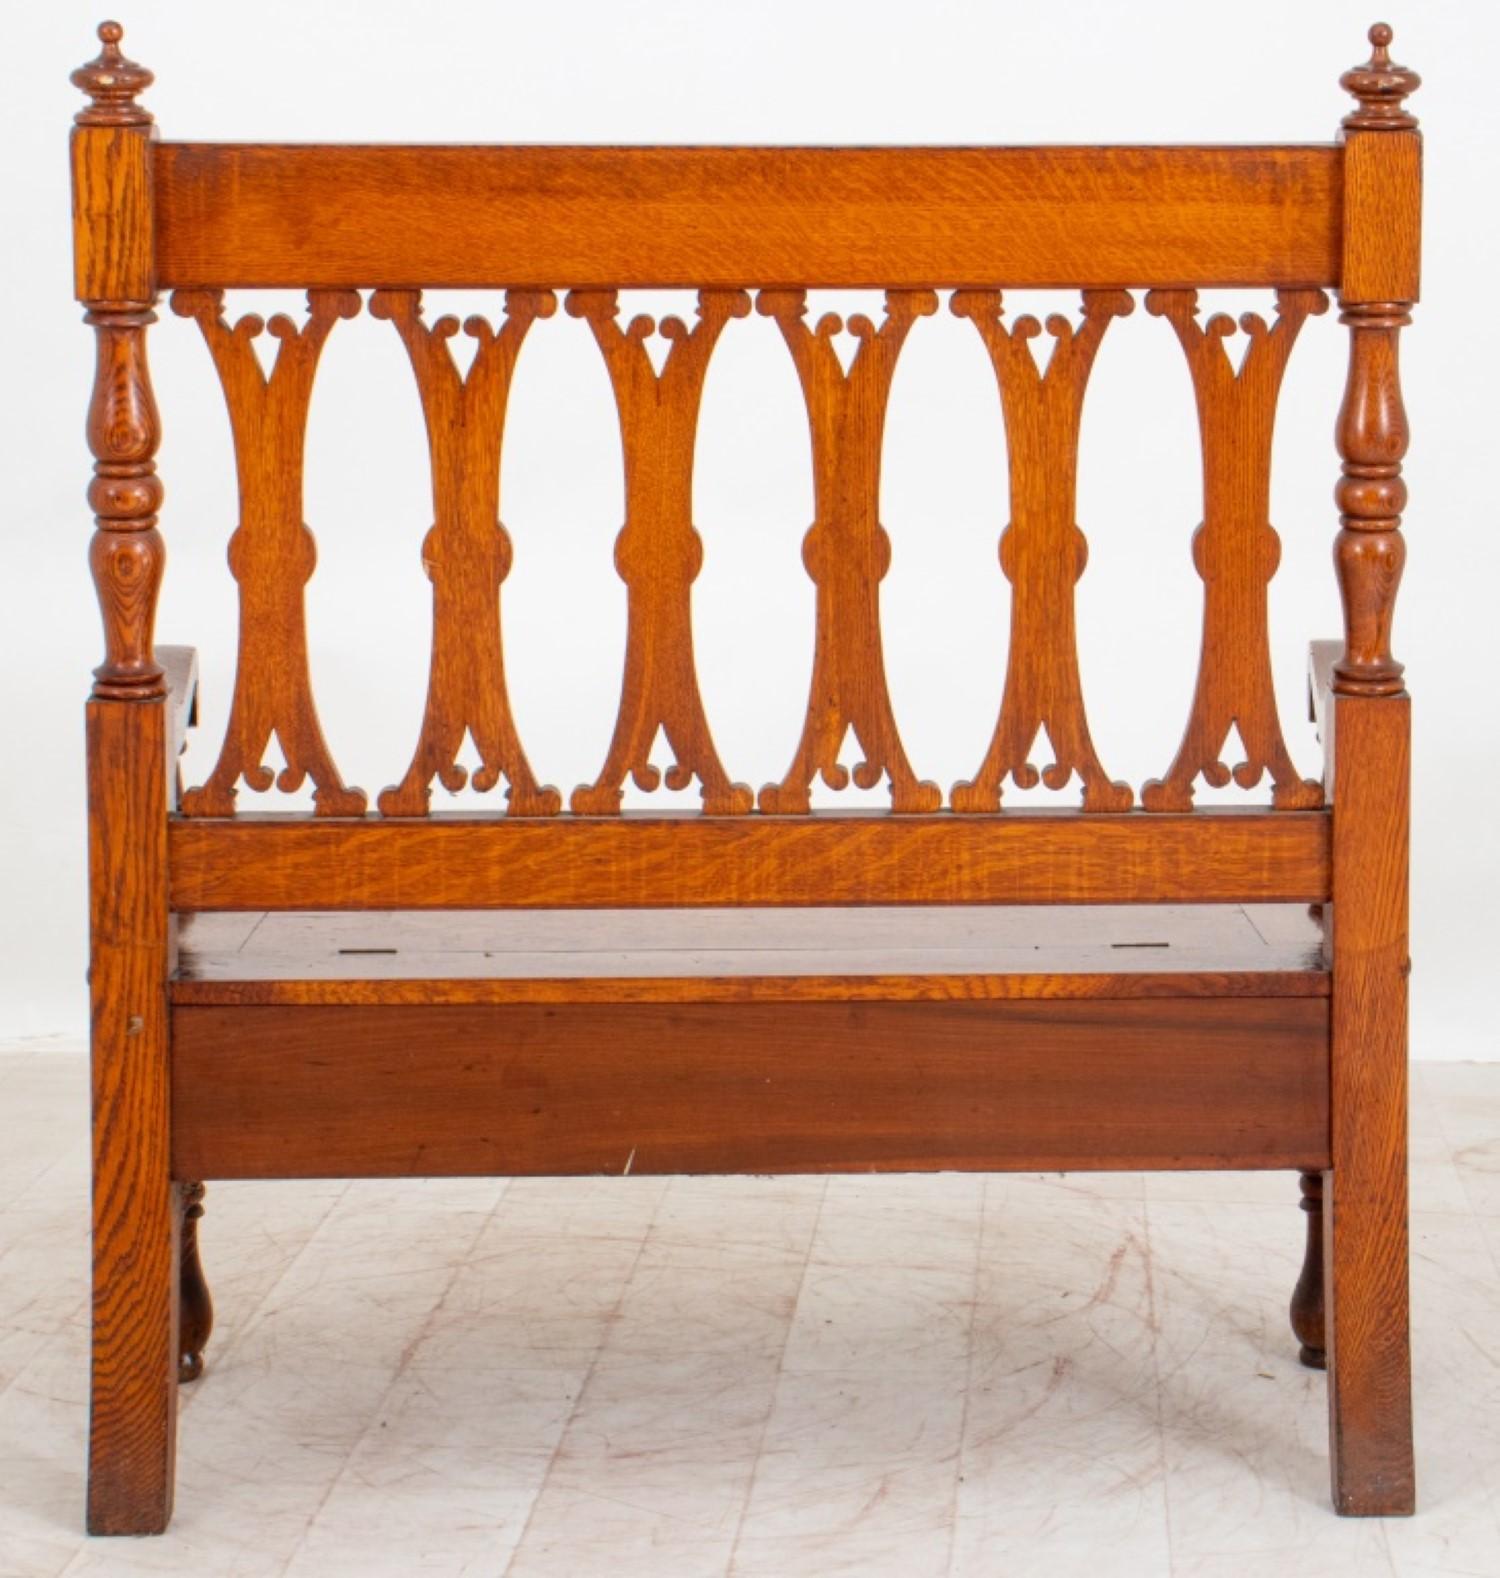 The Renaissance Revival style hall bench or settee,

 measures approximately 51 inches in height, 48 inches in width, and 21 inches in depth. The seat height is approximately 18 inches.




